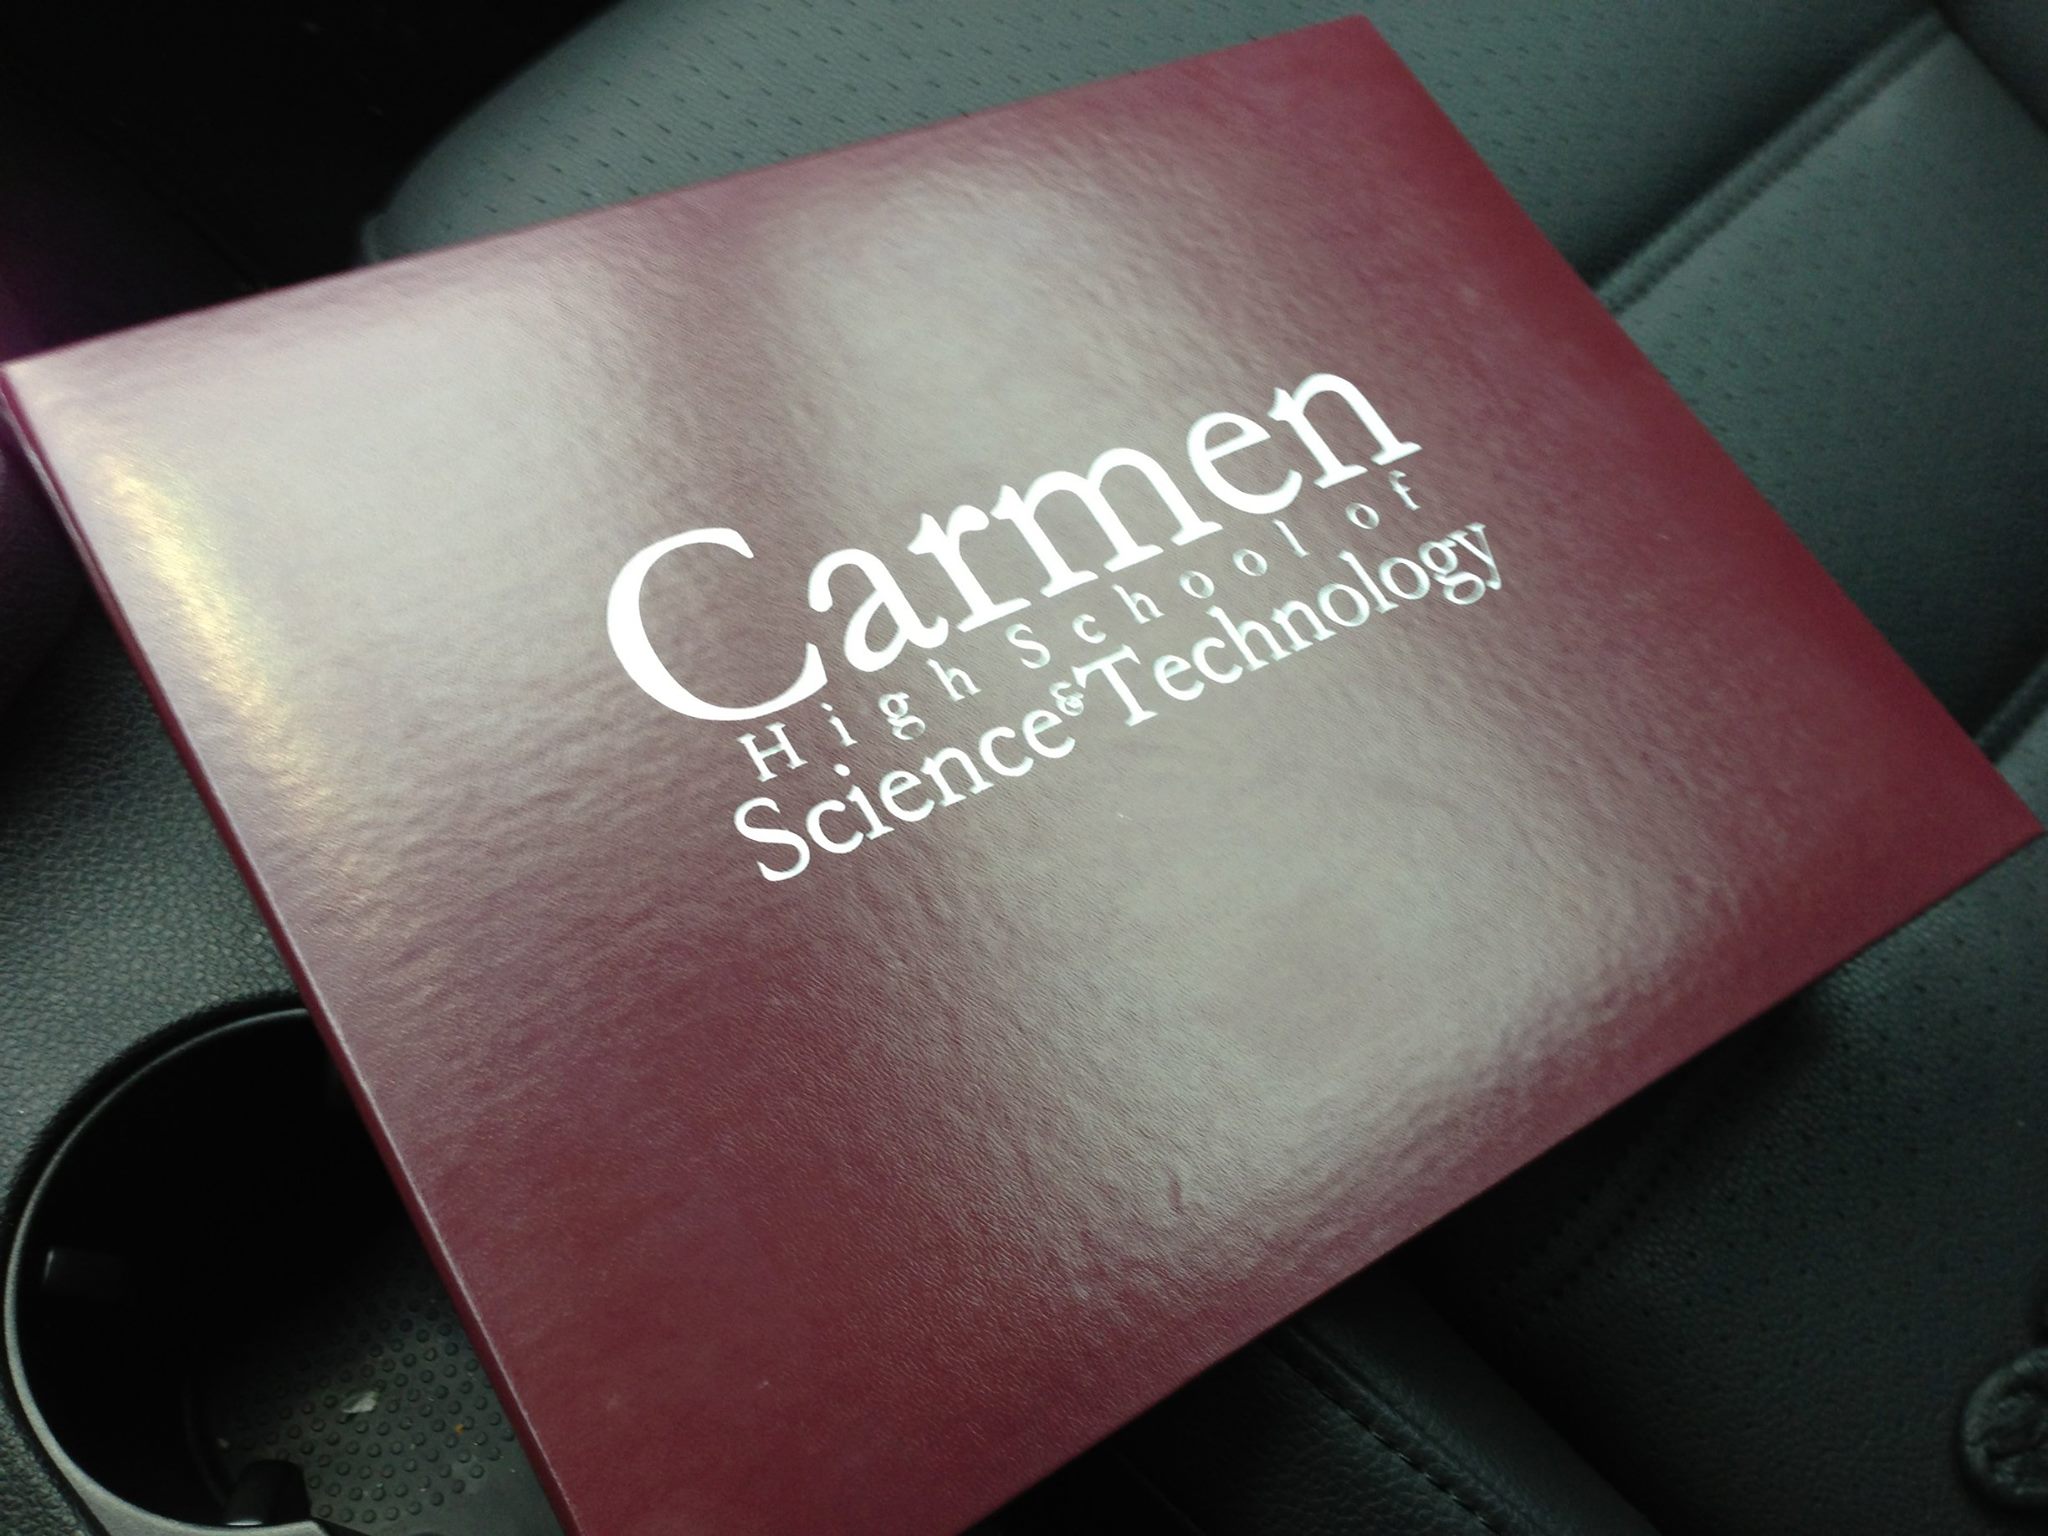 Carmen High School of Science and Technology - South Campus